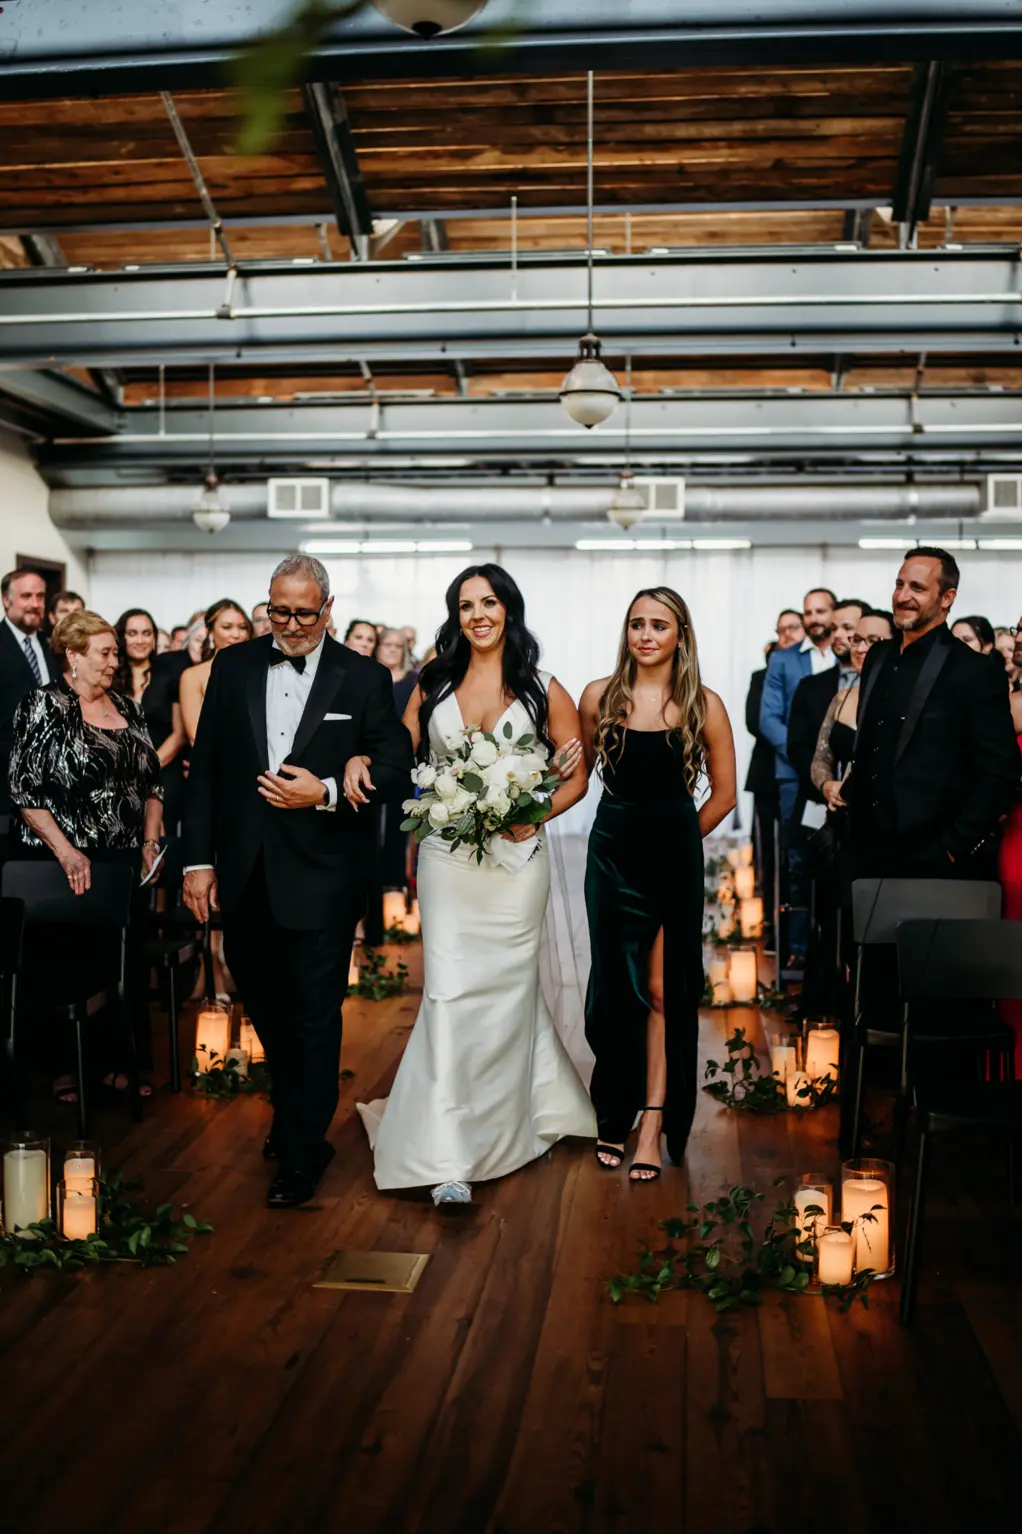 Bride, Father, and Sister Walking Down Aisle | Industrial Indoor Black and White Wedding Ceremony Decor Inspiration